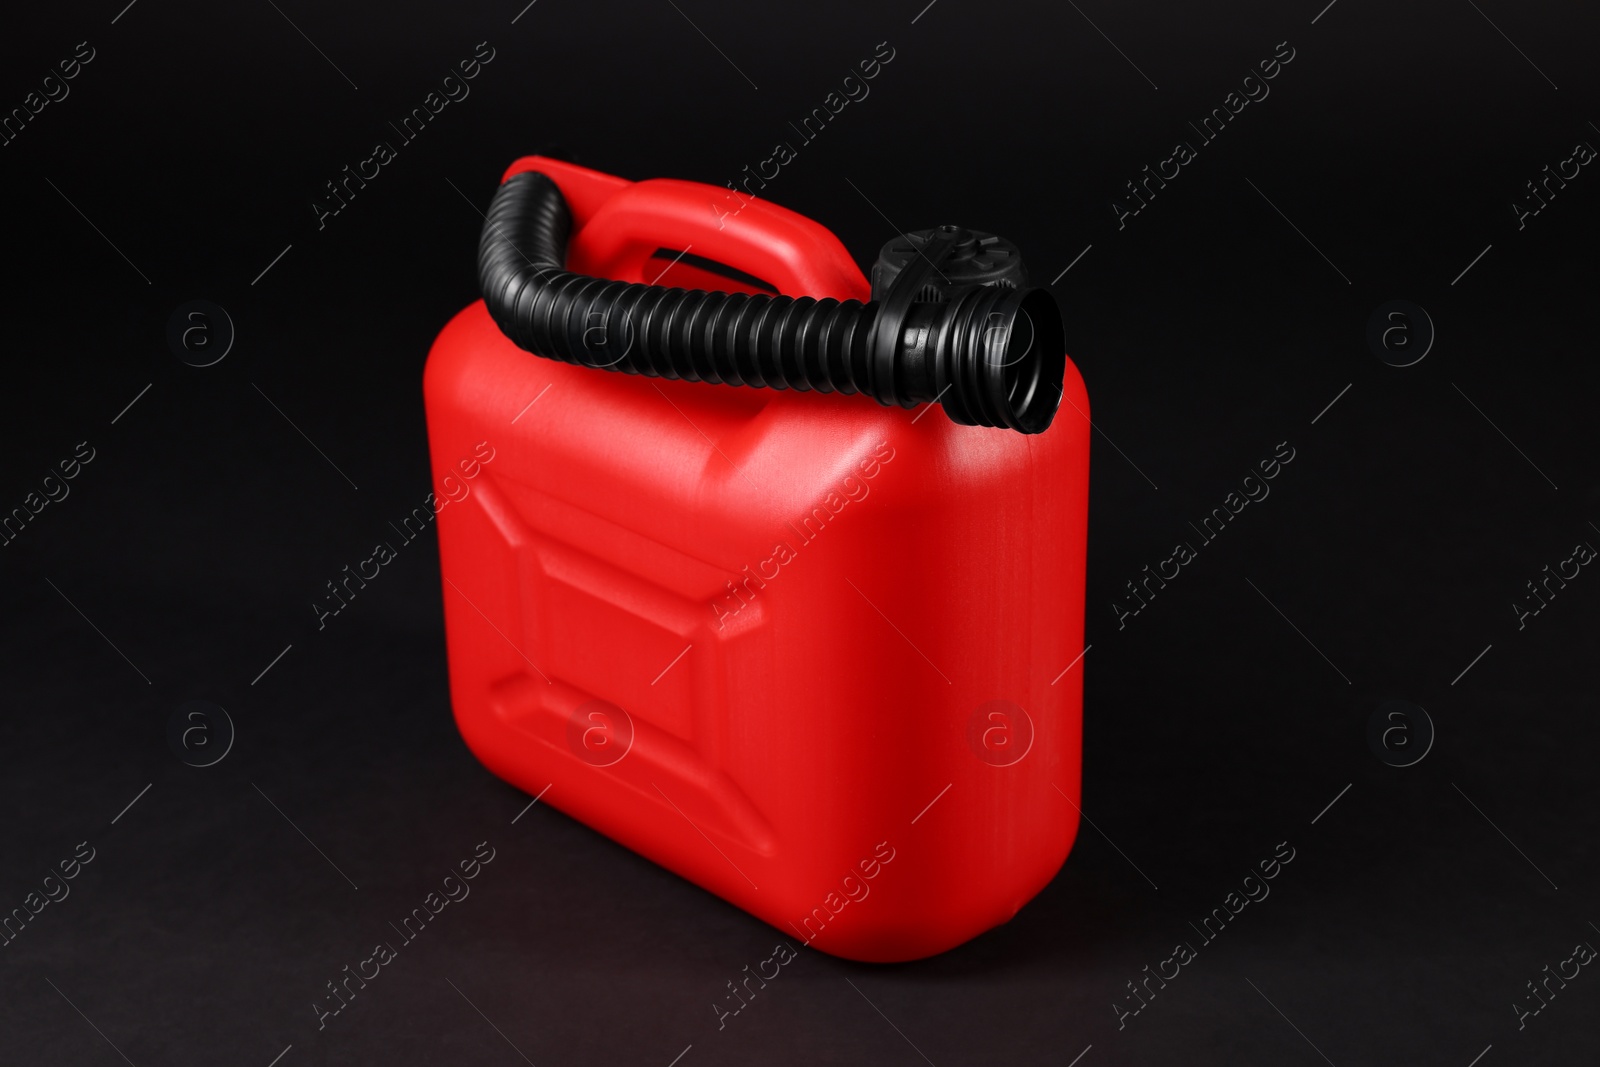 Photo of New red plastic canister on black background